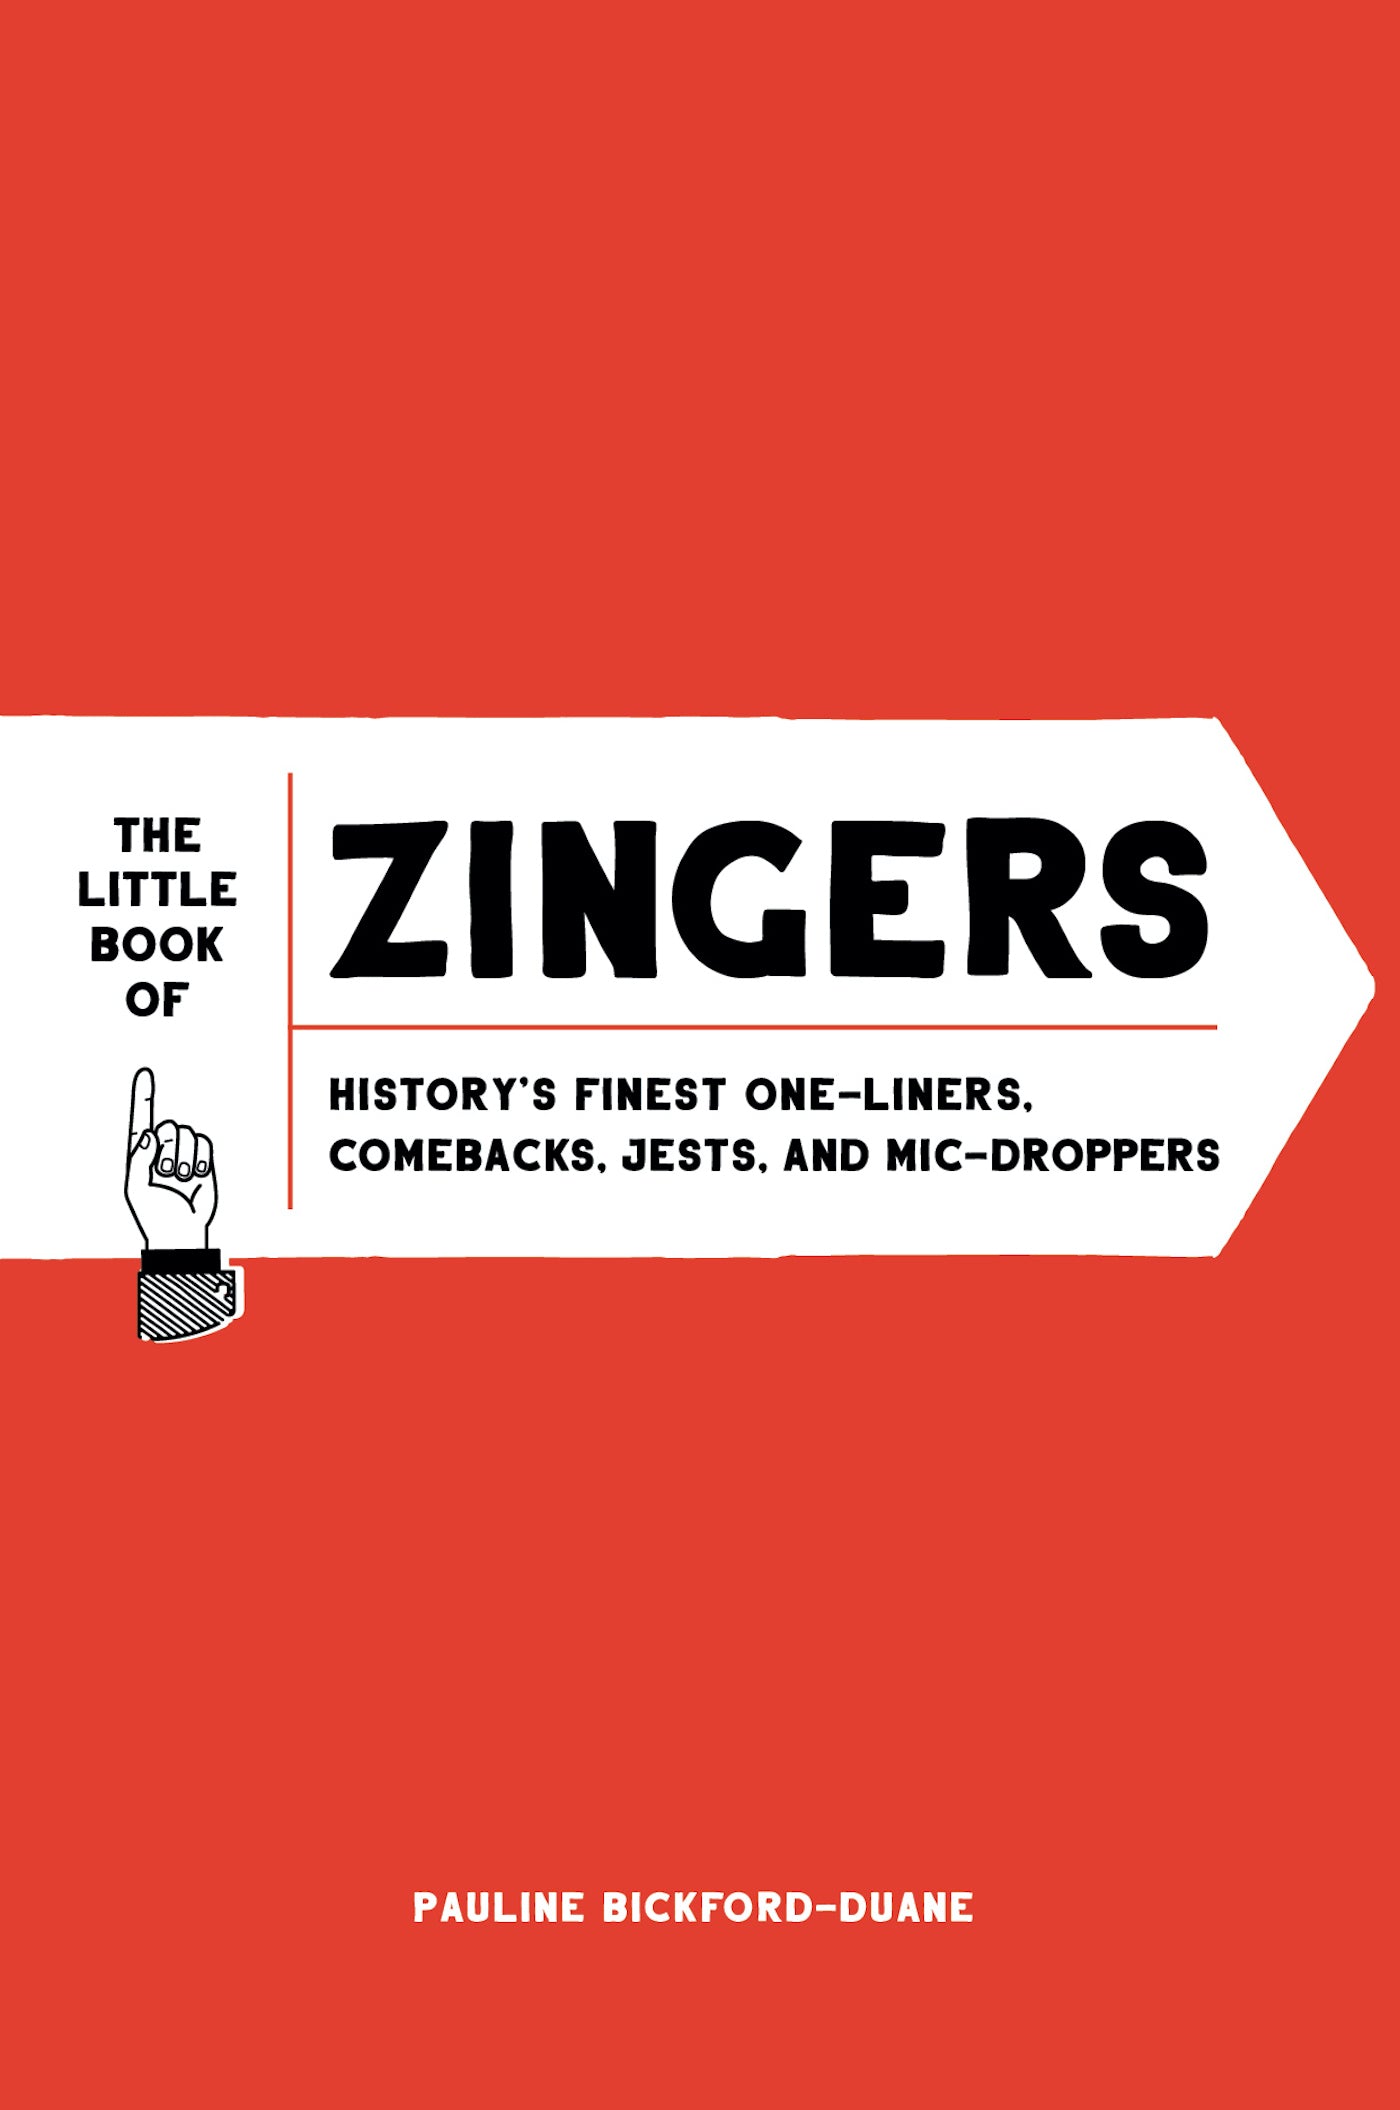 The Little Book of Zingers: History's Finest One-Liners, Comebacks, Jests, and Mic-Droppers